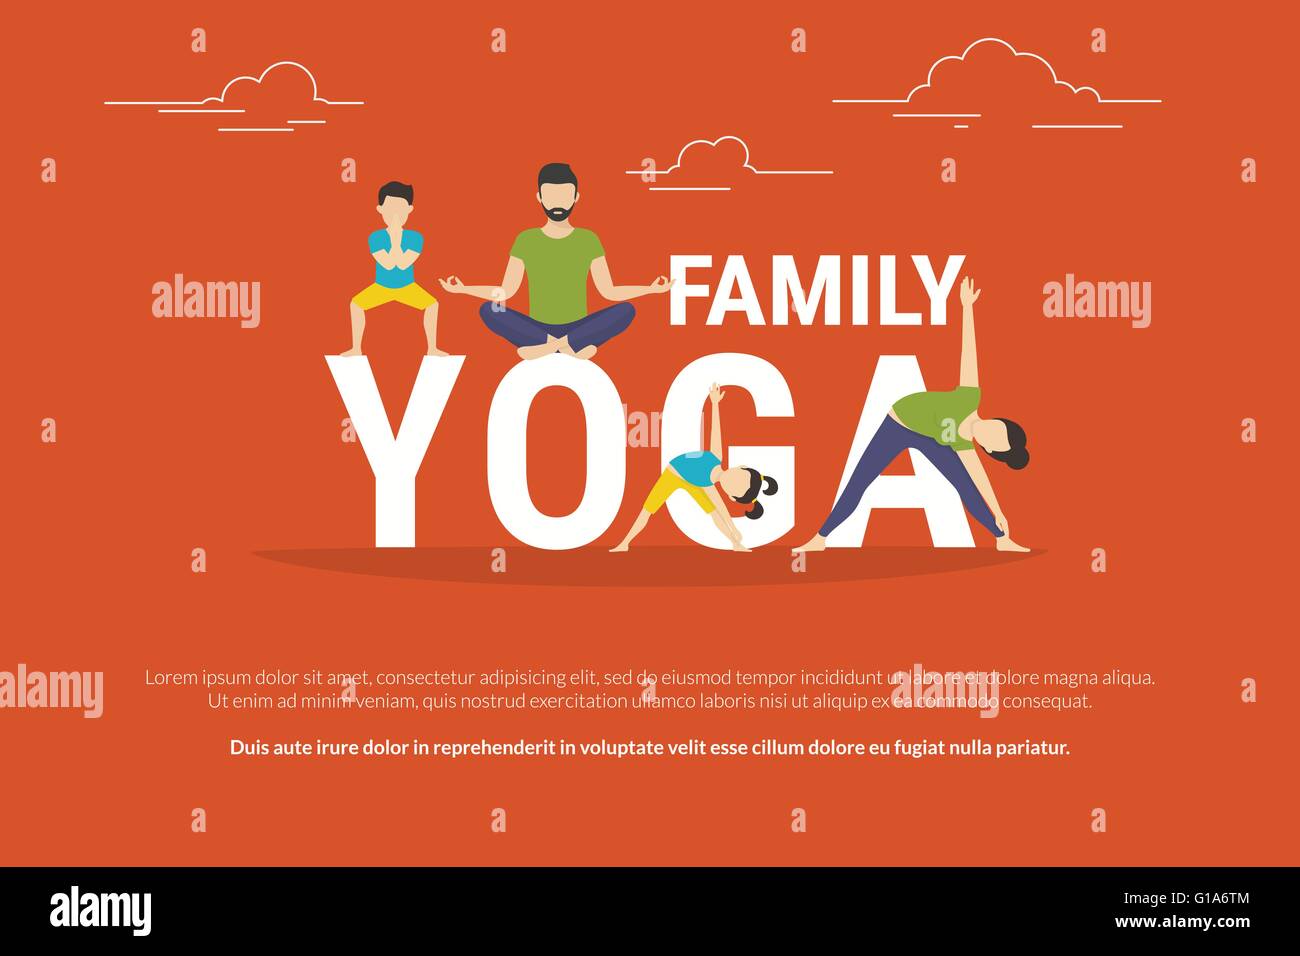 Concept illustration of family yoga Stock Vector